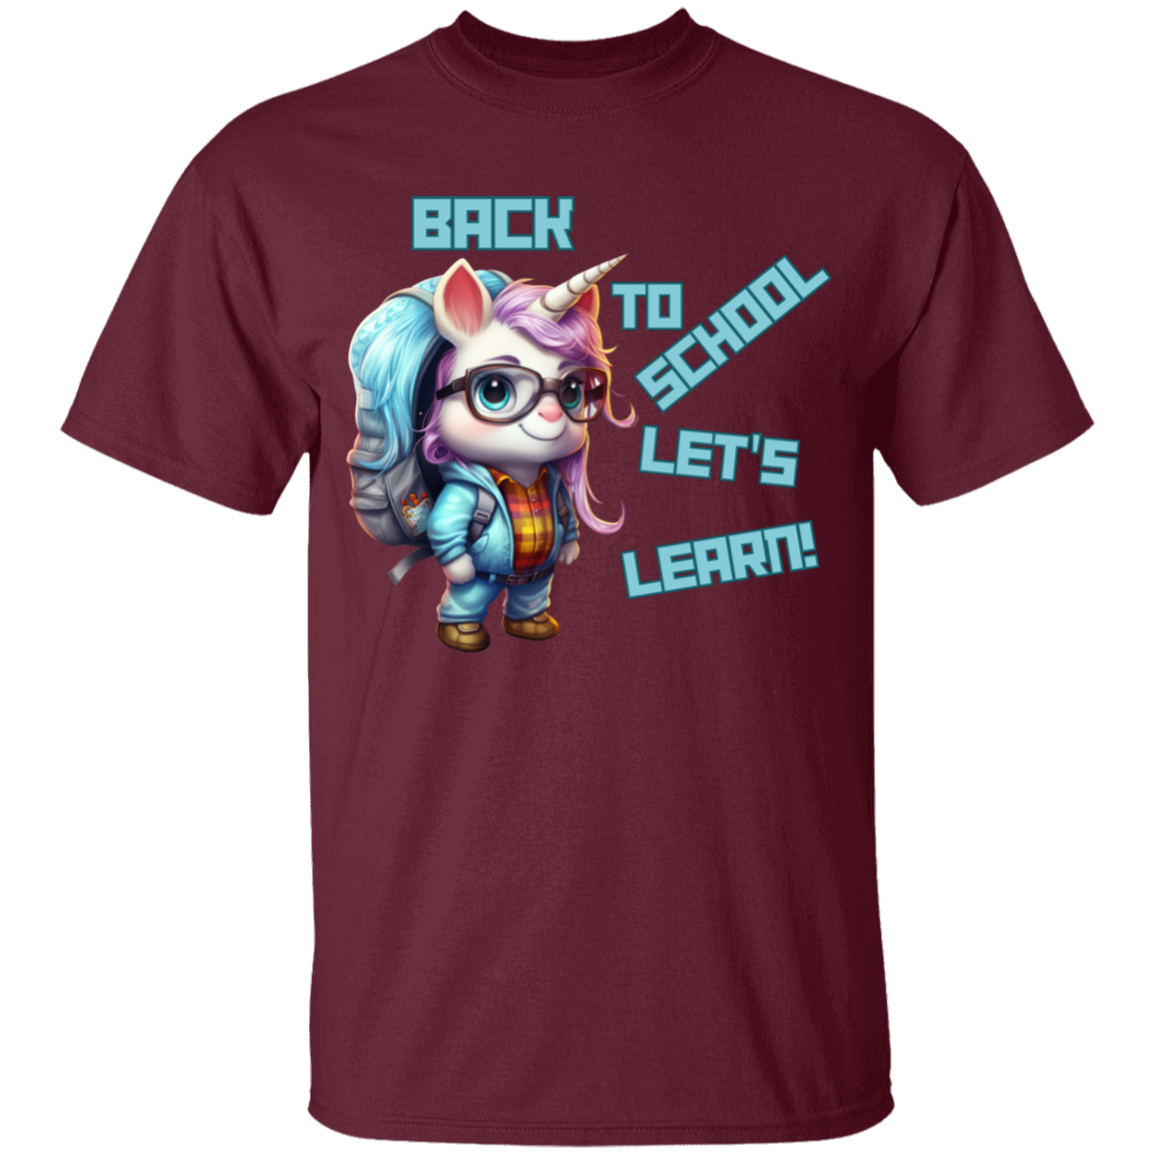 Back to School Let's Learn T-Shirt: Adorable Unicorn Cartoon for Youth